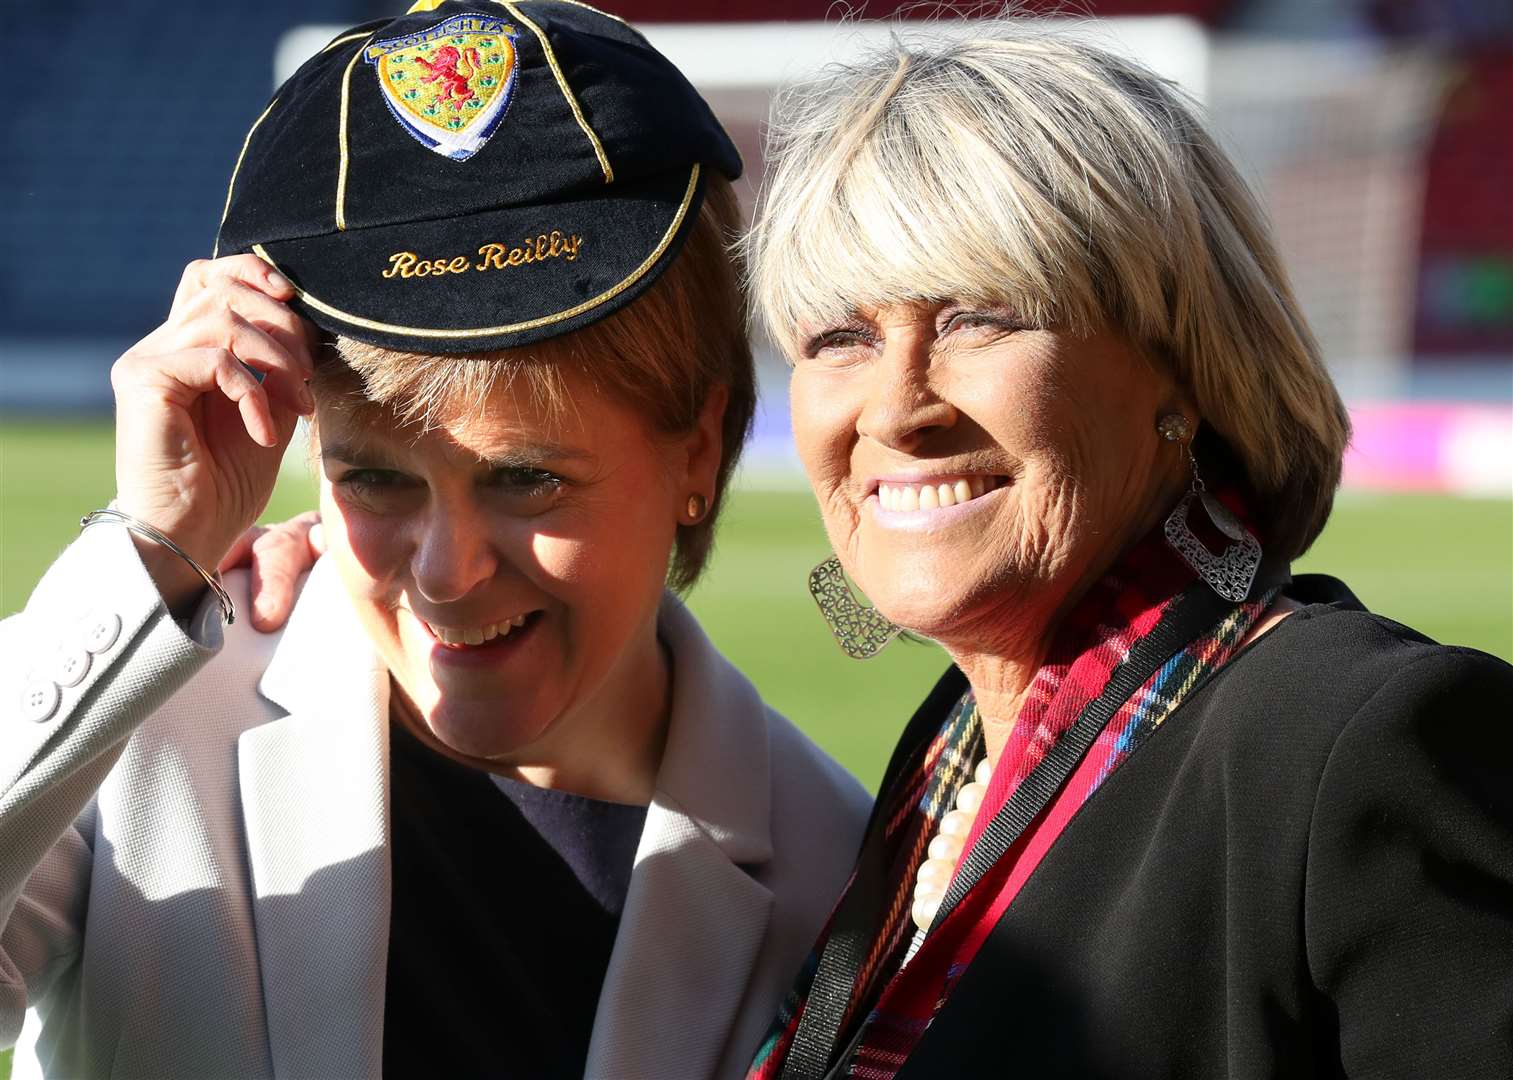 Rose Reilly, right, pictured with Scotland’s First Minister Nicola Sturgeon in 2019 (Andrew Milligan/PA)